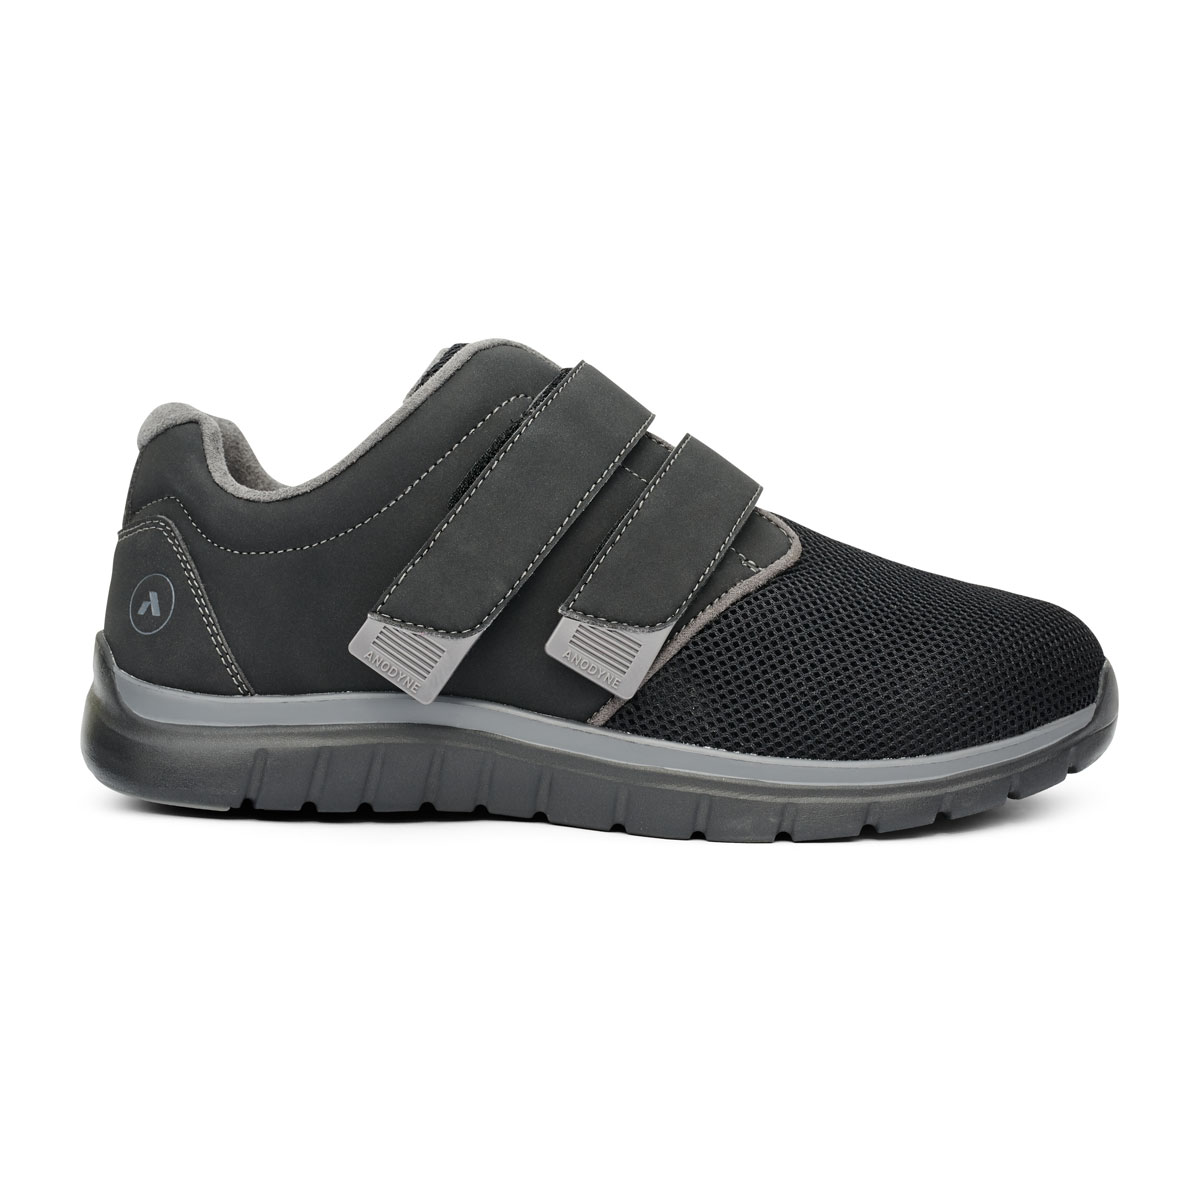 mens sports shoes with velcro straps